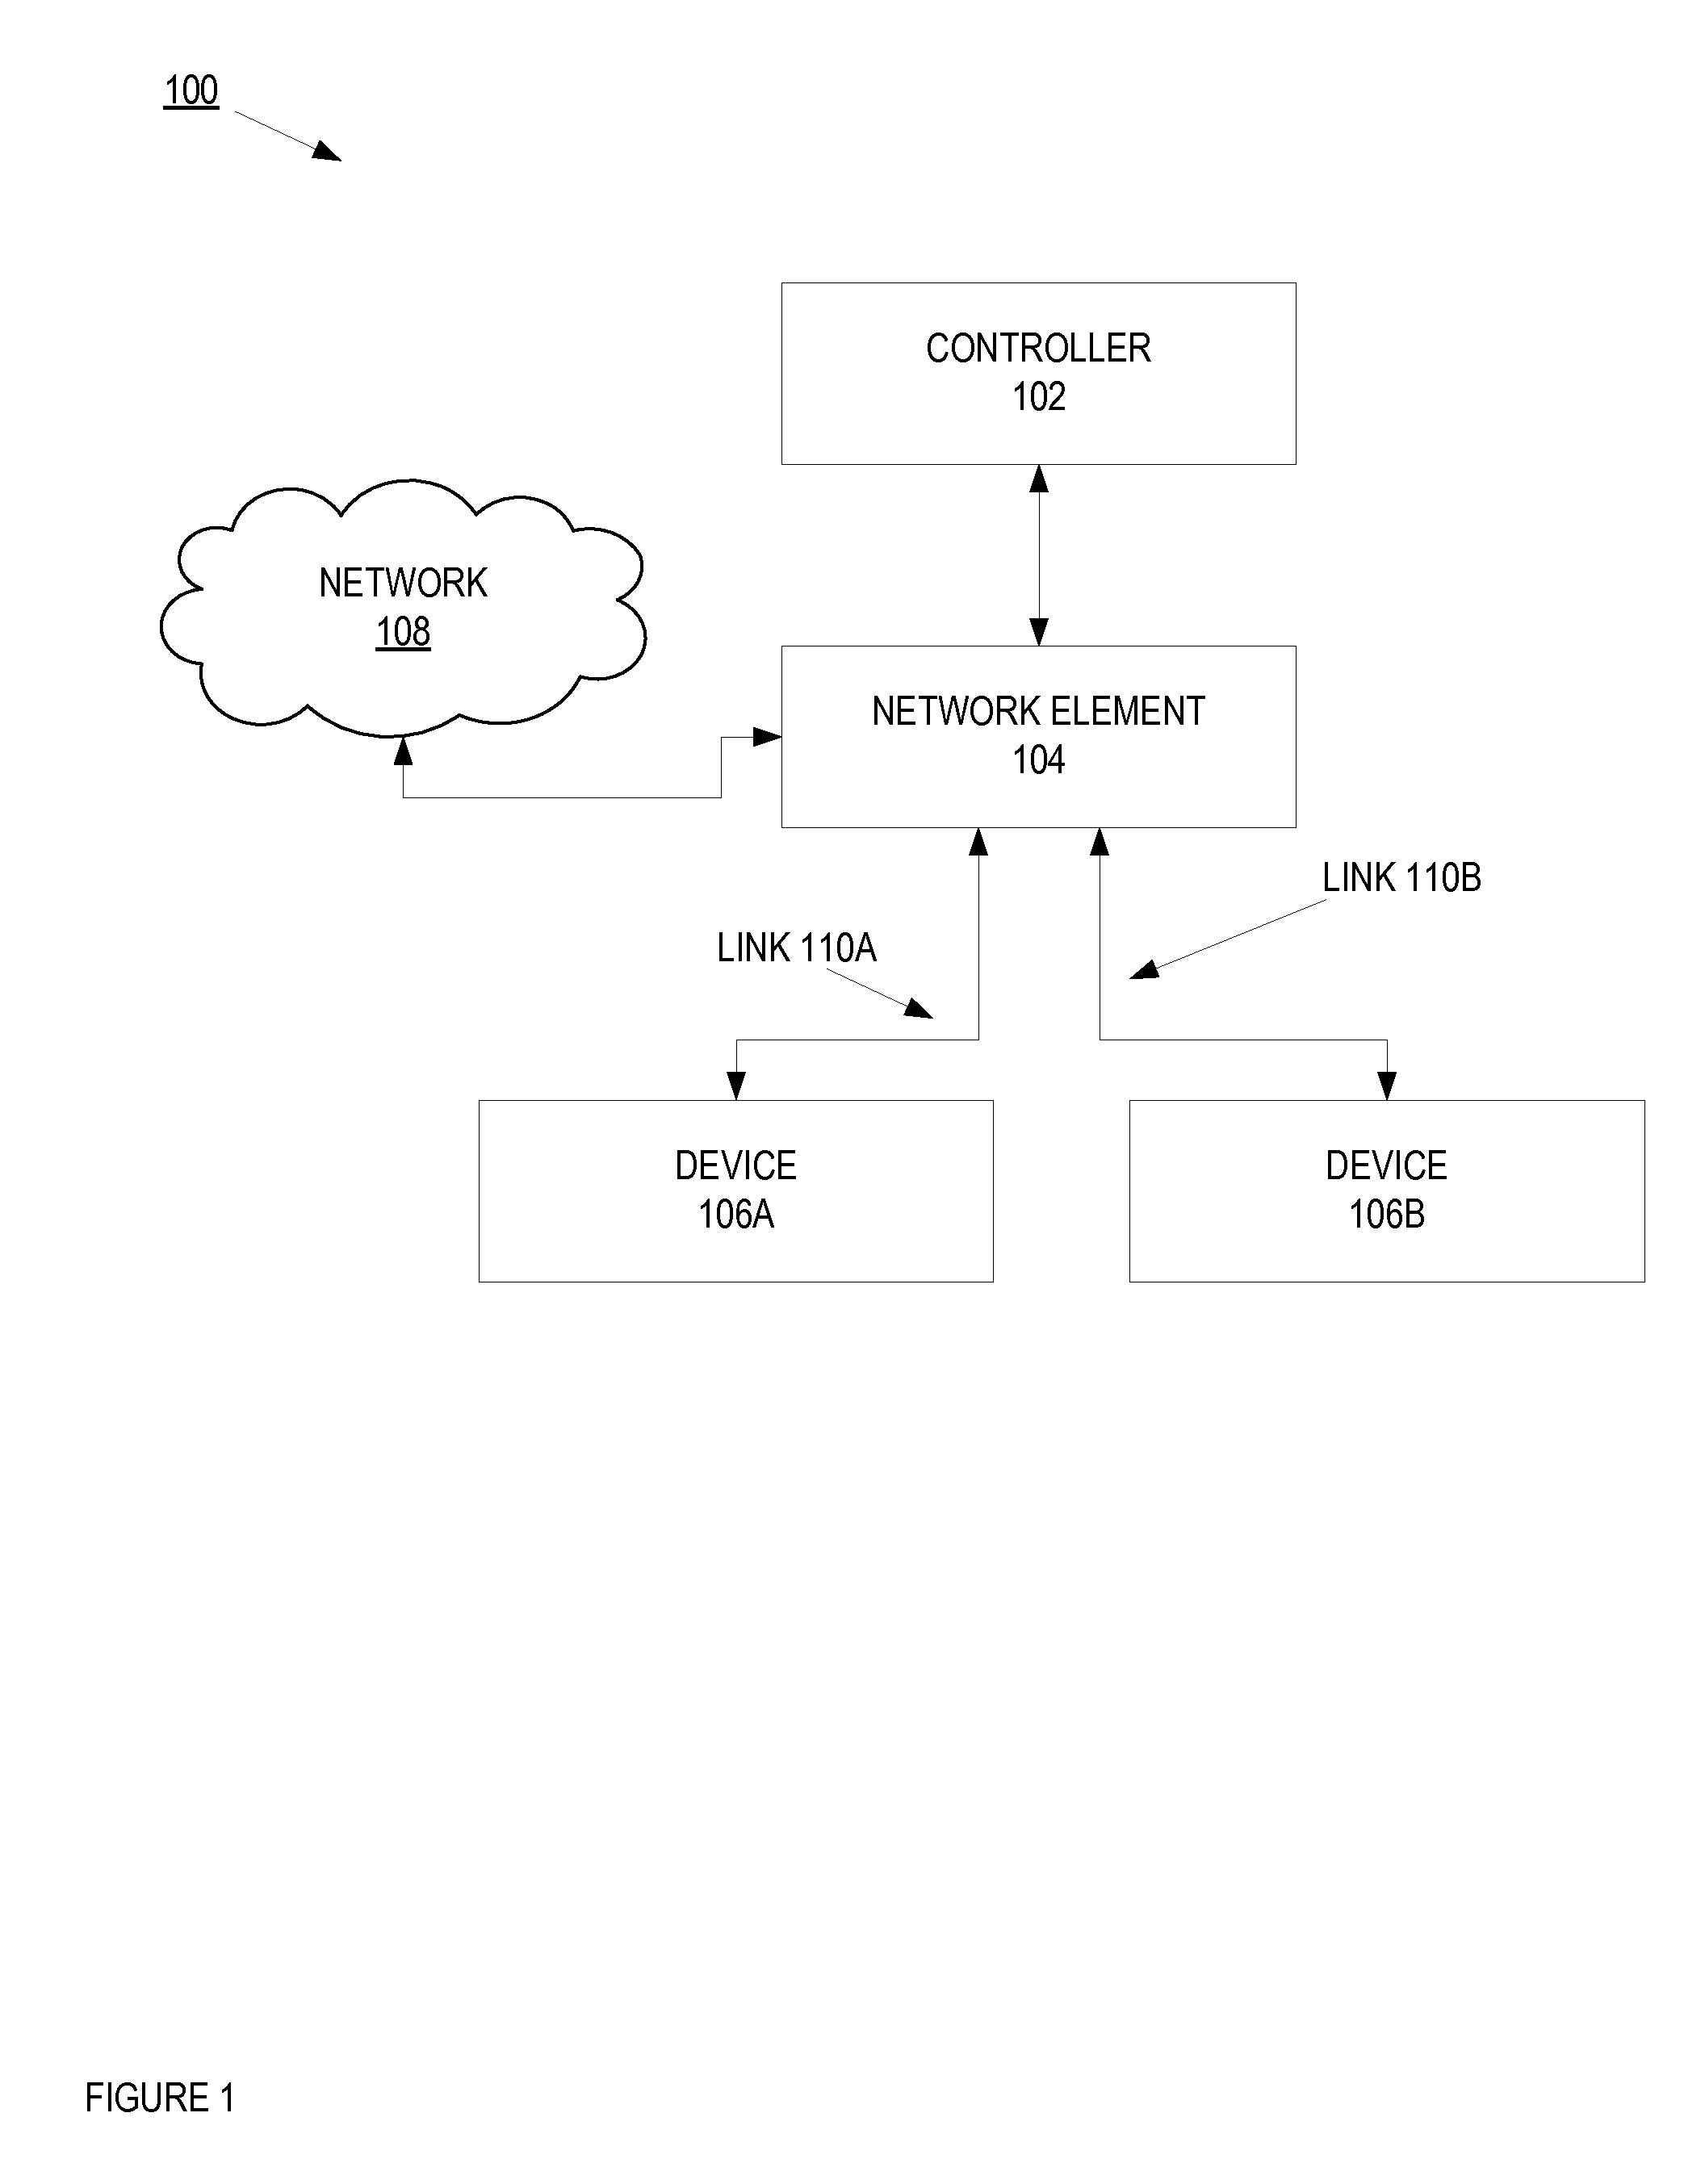 System and method for abstracting network policy from physical interfaces and creating portable network policy